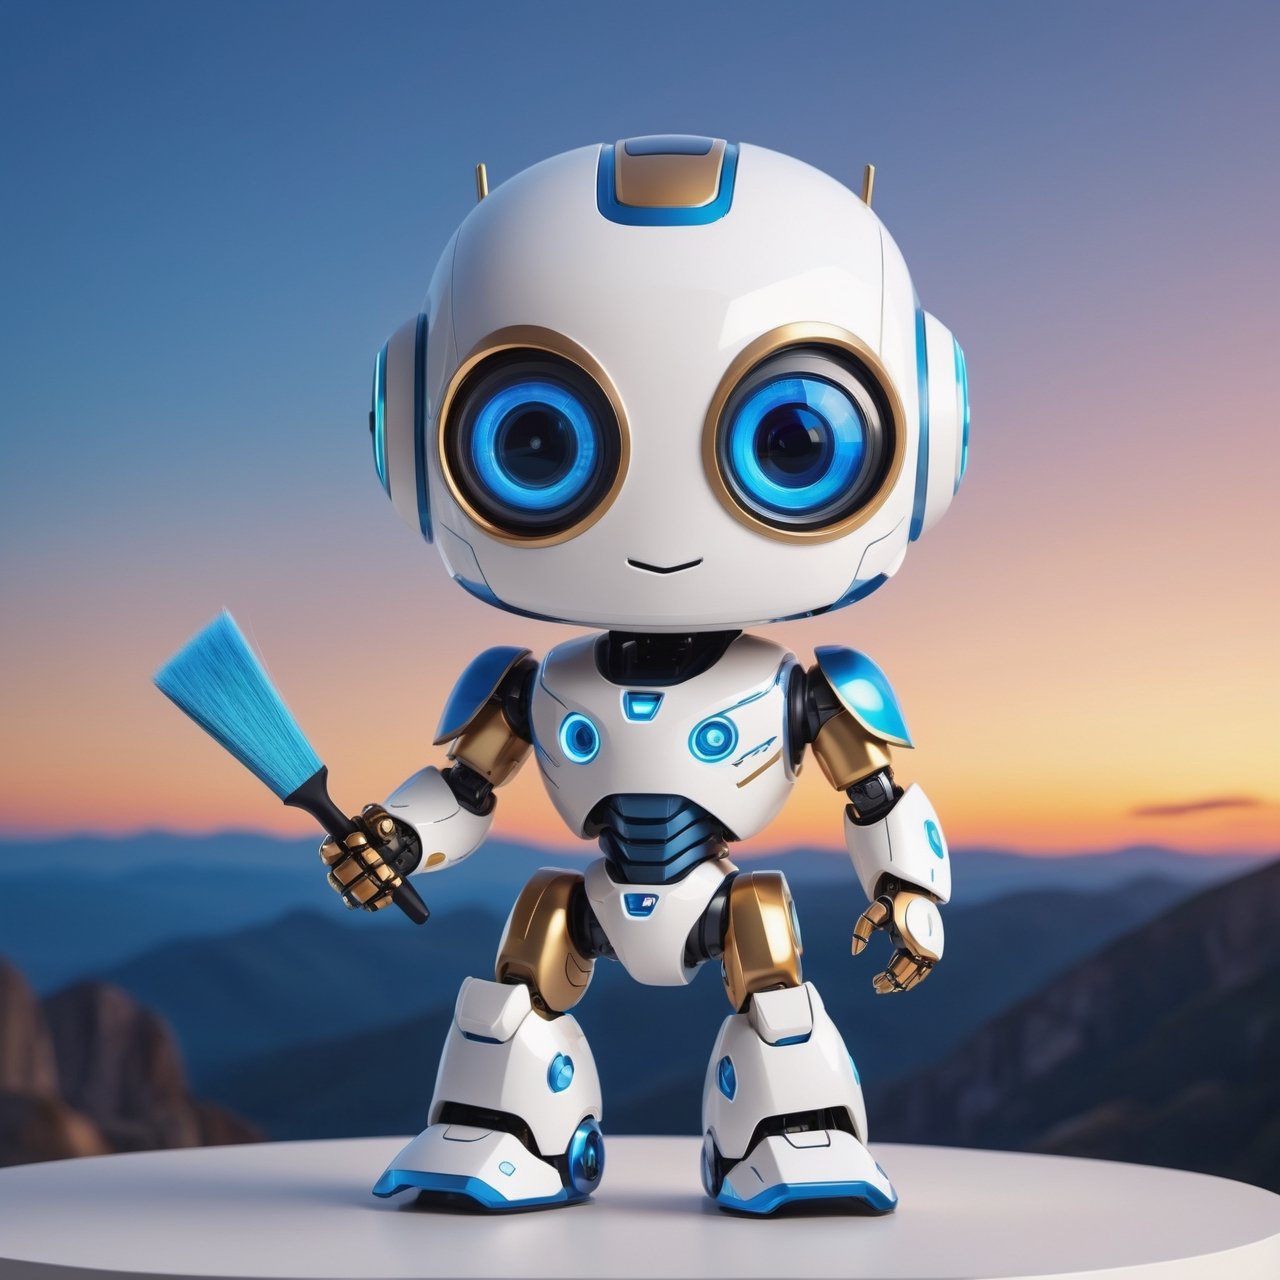 (masterpiece:1.2, highest quality), (realistic, photo_realistic:1.9)
1chibi_robot, Cute chibi robot, happy face, Designer look holding a paintbrush in one hand, white with blue, (detailed background), (gradients), colorful, detailed landscape, visual key, shiny skin. Modern place, Action camera. Portrait film. Standard lens. Golden hour lighting.
sharp focus, 8k, UHD, high quality, frowning, intricate detailed, highly detailed, hyper-realistic,interior,robot white with blue,chibi emote style,Monster